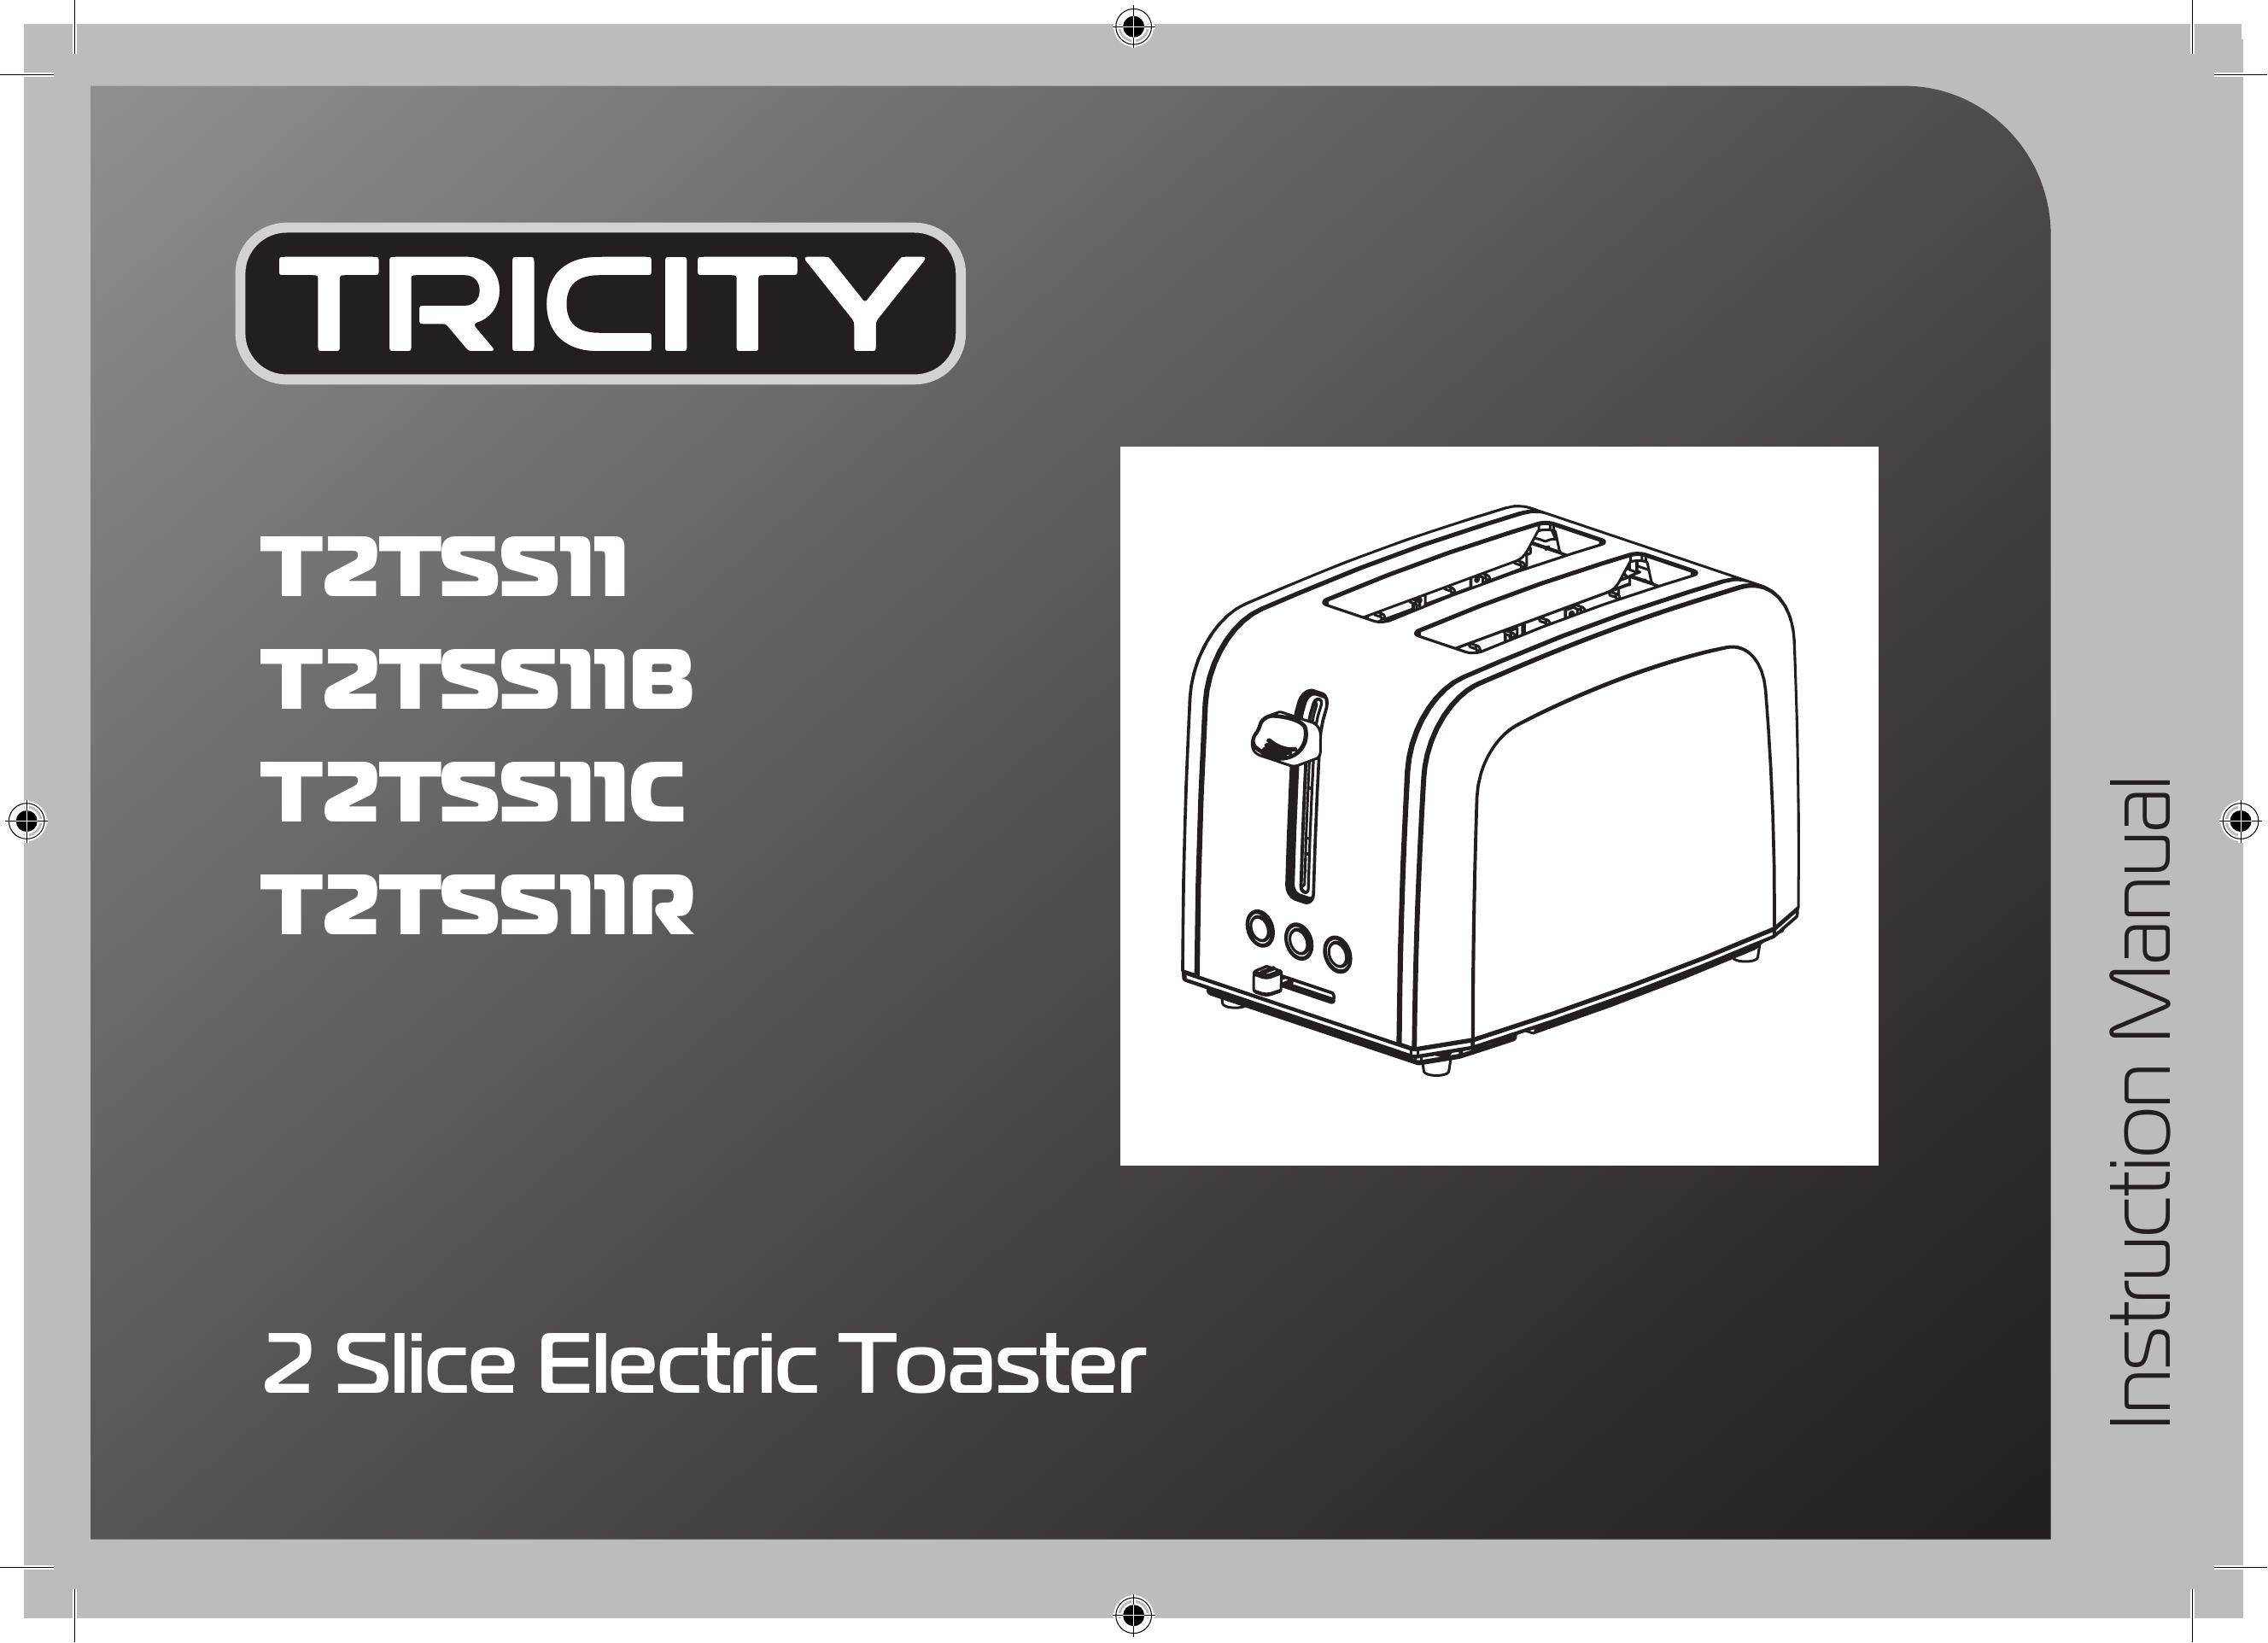 Tricity Bendix T2TSS11R Toaster User Manual